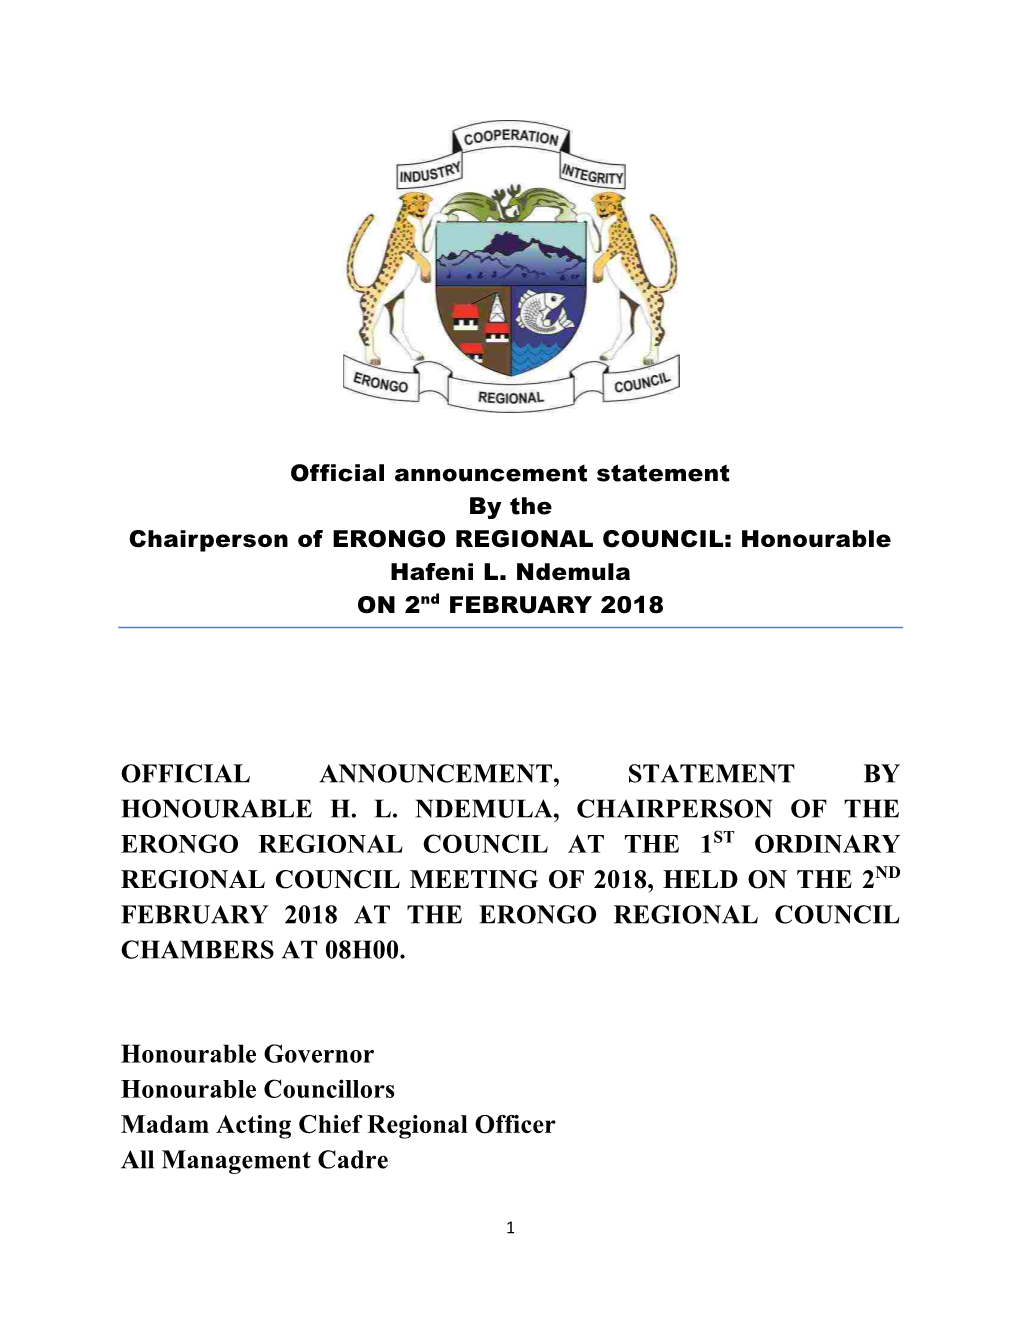 Official Statement by ERC Chairperson 2Nd February 2018